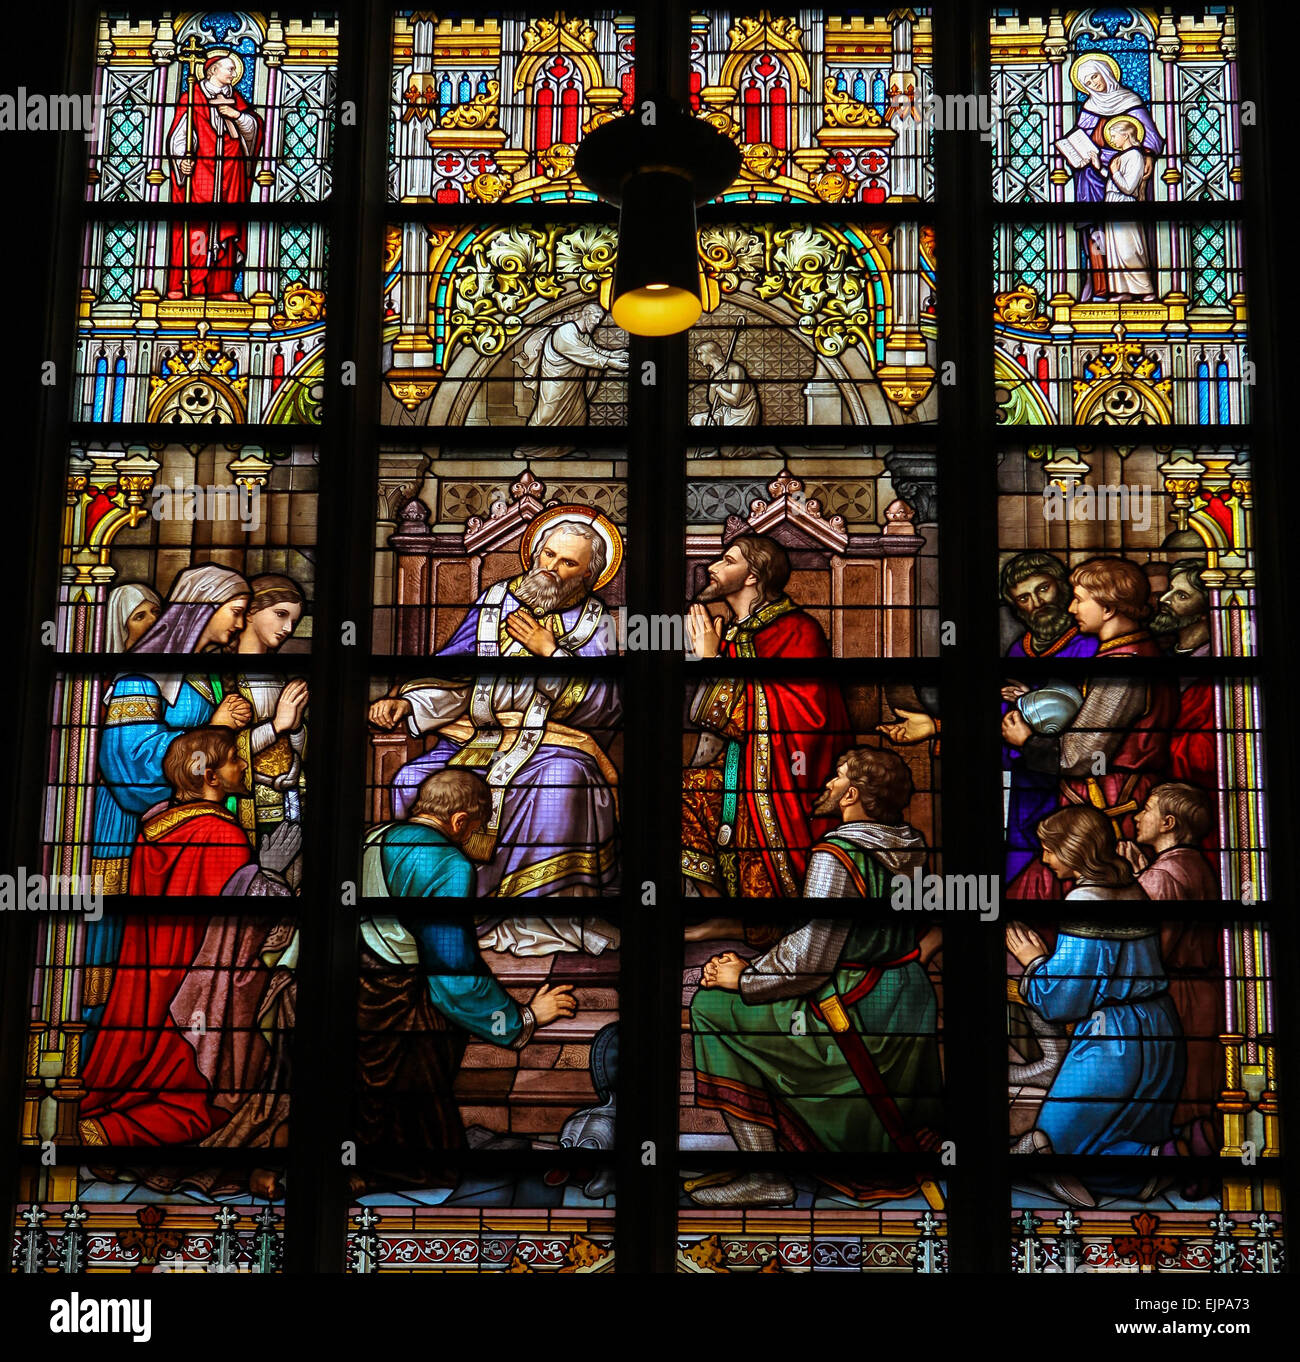 Stained Glass Window depicting the Sacrament of Confession or Penance, with Pepin of Herstal confessing his sins to Saint Wiro Stock Photo